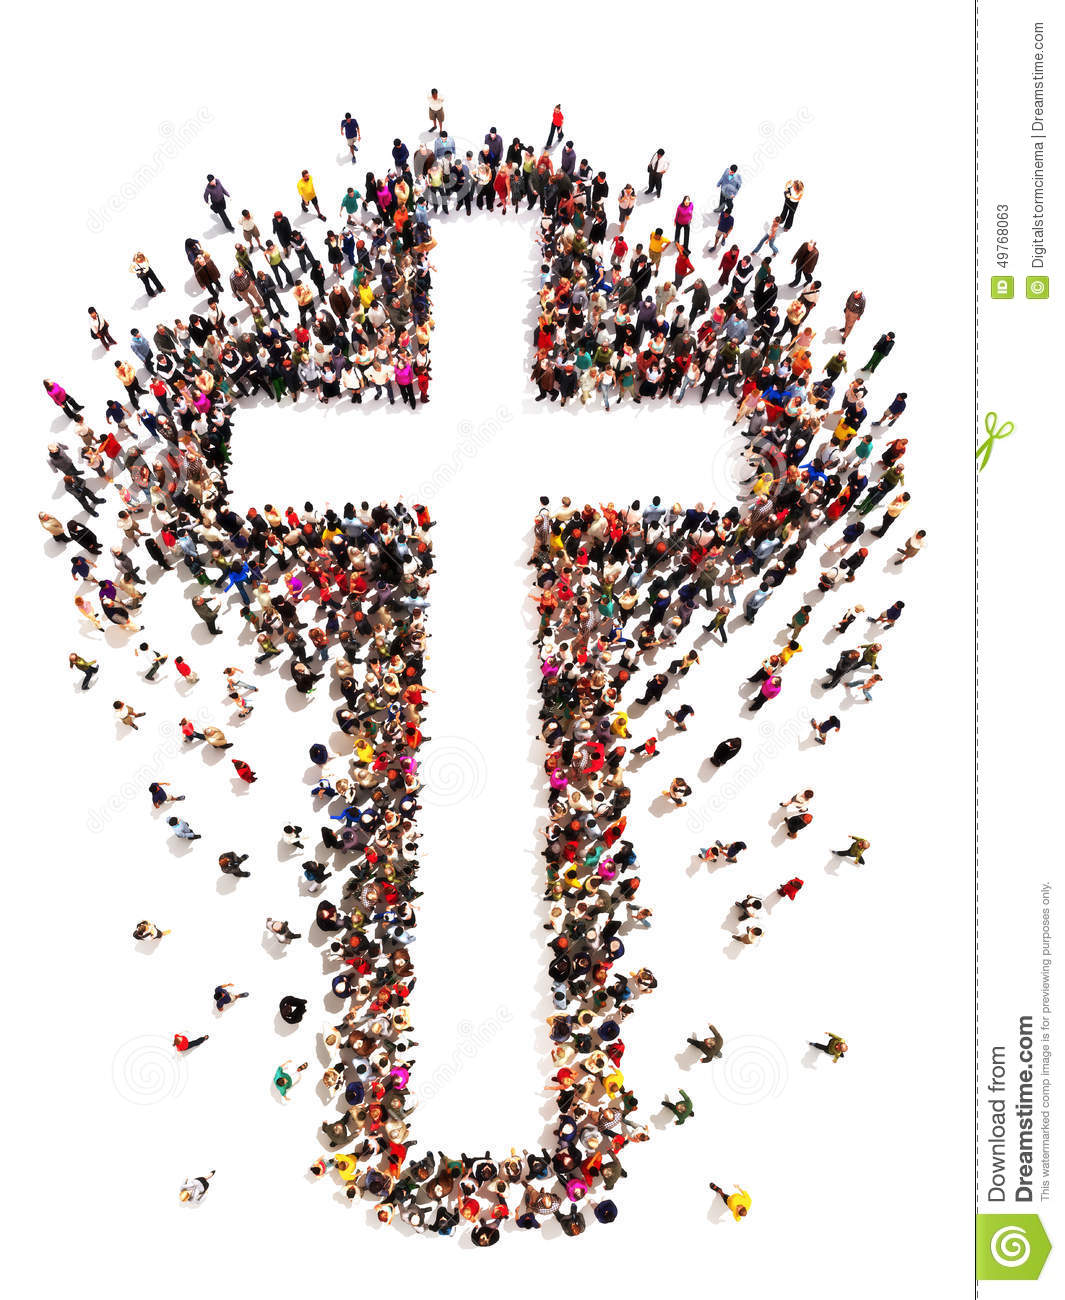 people-finding-christianity-religion-faith-large-crowd-walking-to-forming-shape-cross-white-49768063